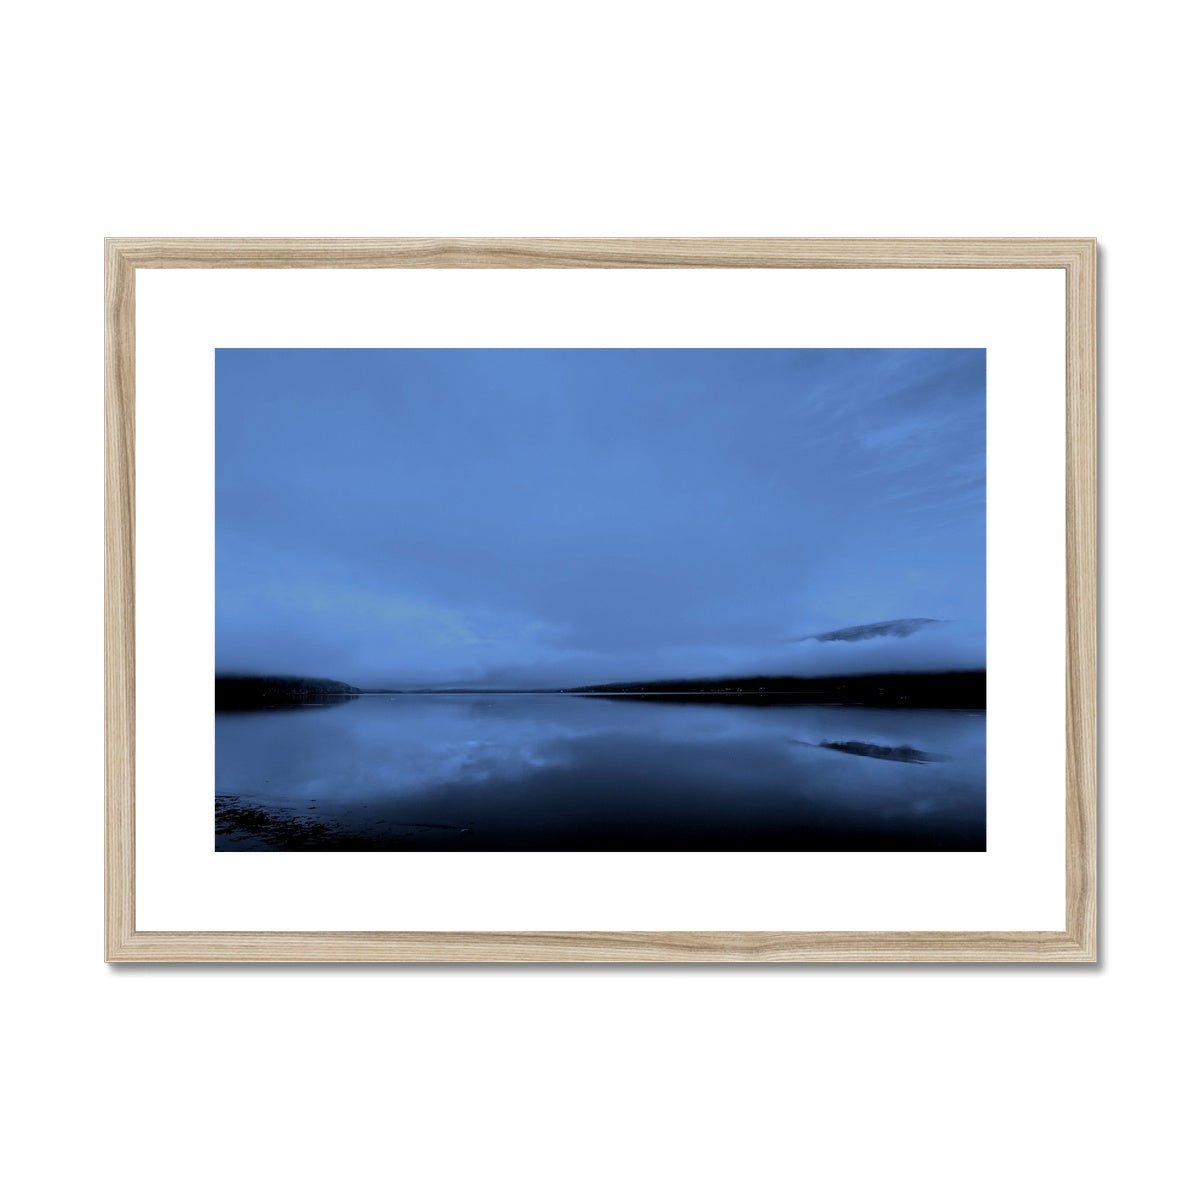 The Blue Hour Loch Fyne Painting | Framed & Mounted Prints From Scotland-Framed & Mounted Prints-Scottish Lochs & Mountains Art Gallery-A2 Landscape-Natural Frame-Paintings, Prints, Homeware, Art Gifts From Scotland By Scottish Artist Kevin Hunter